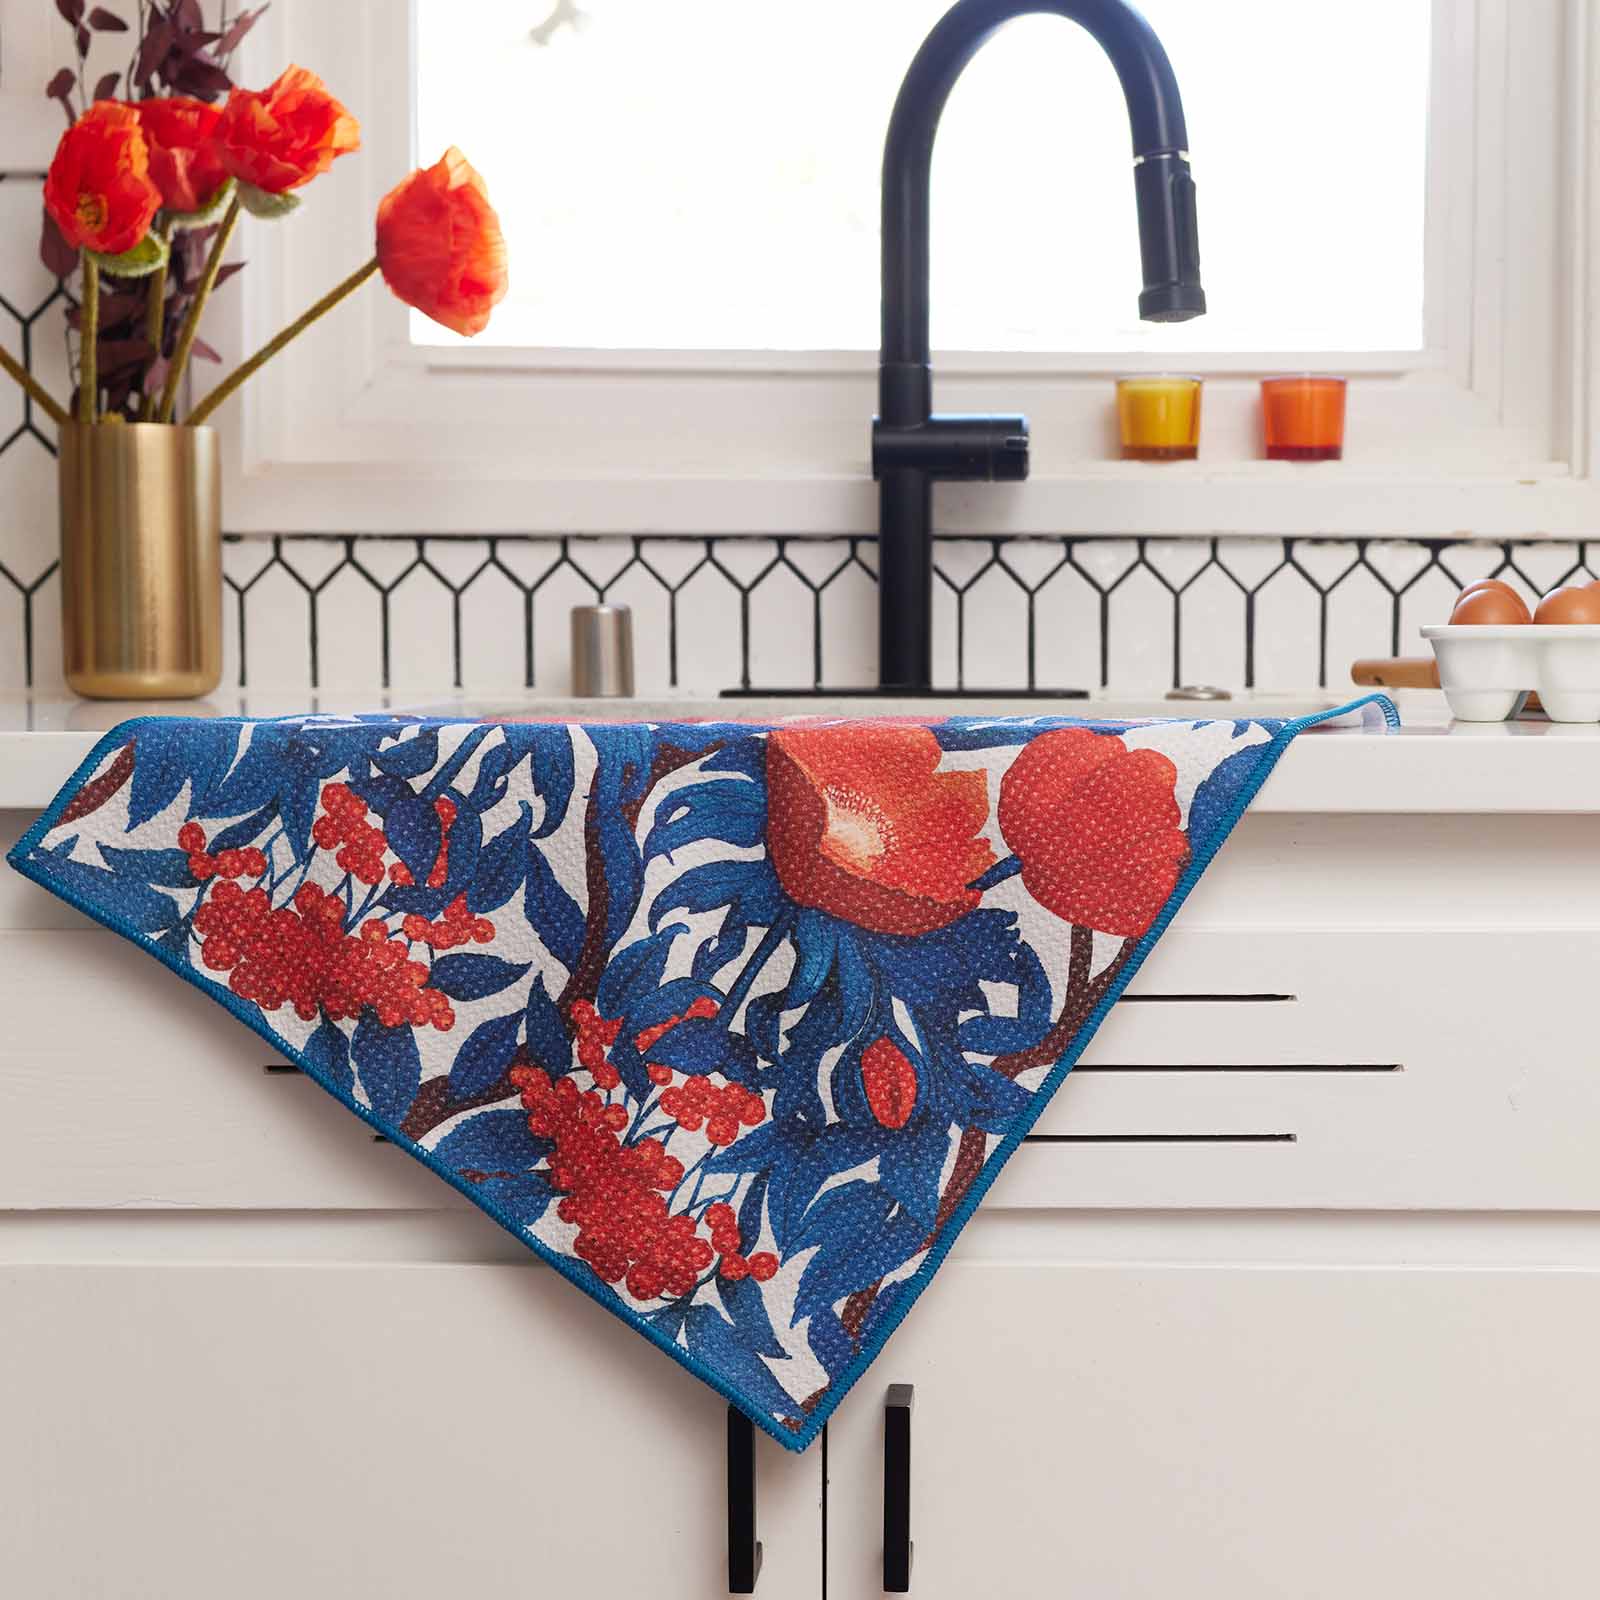  Giwawa Spring Poppy Hanging Kitchen Towels with Loop